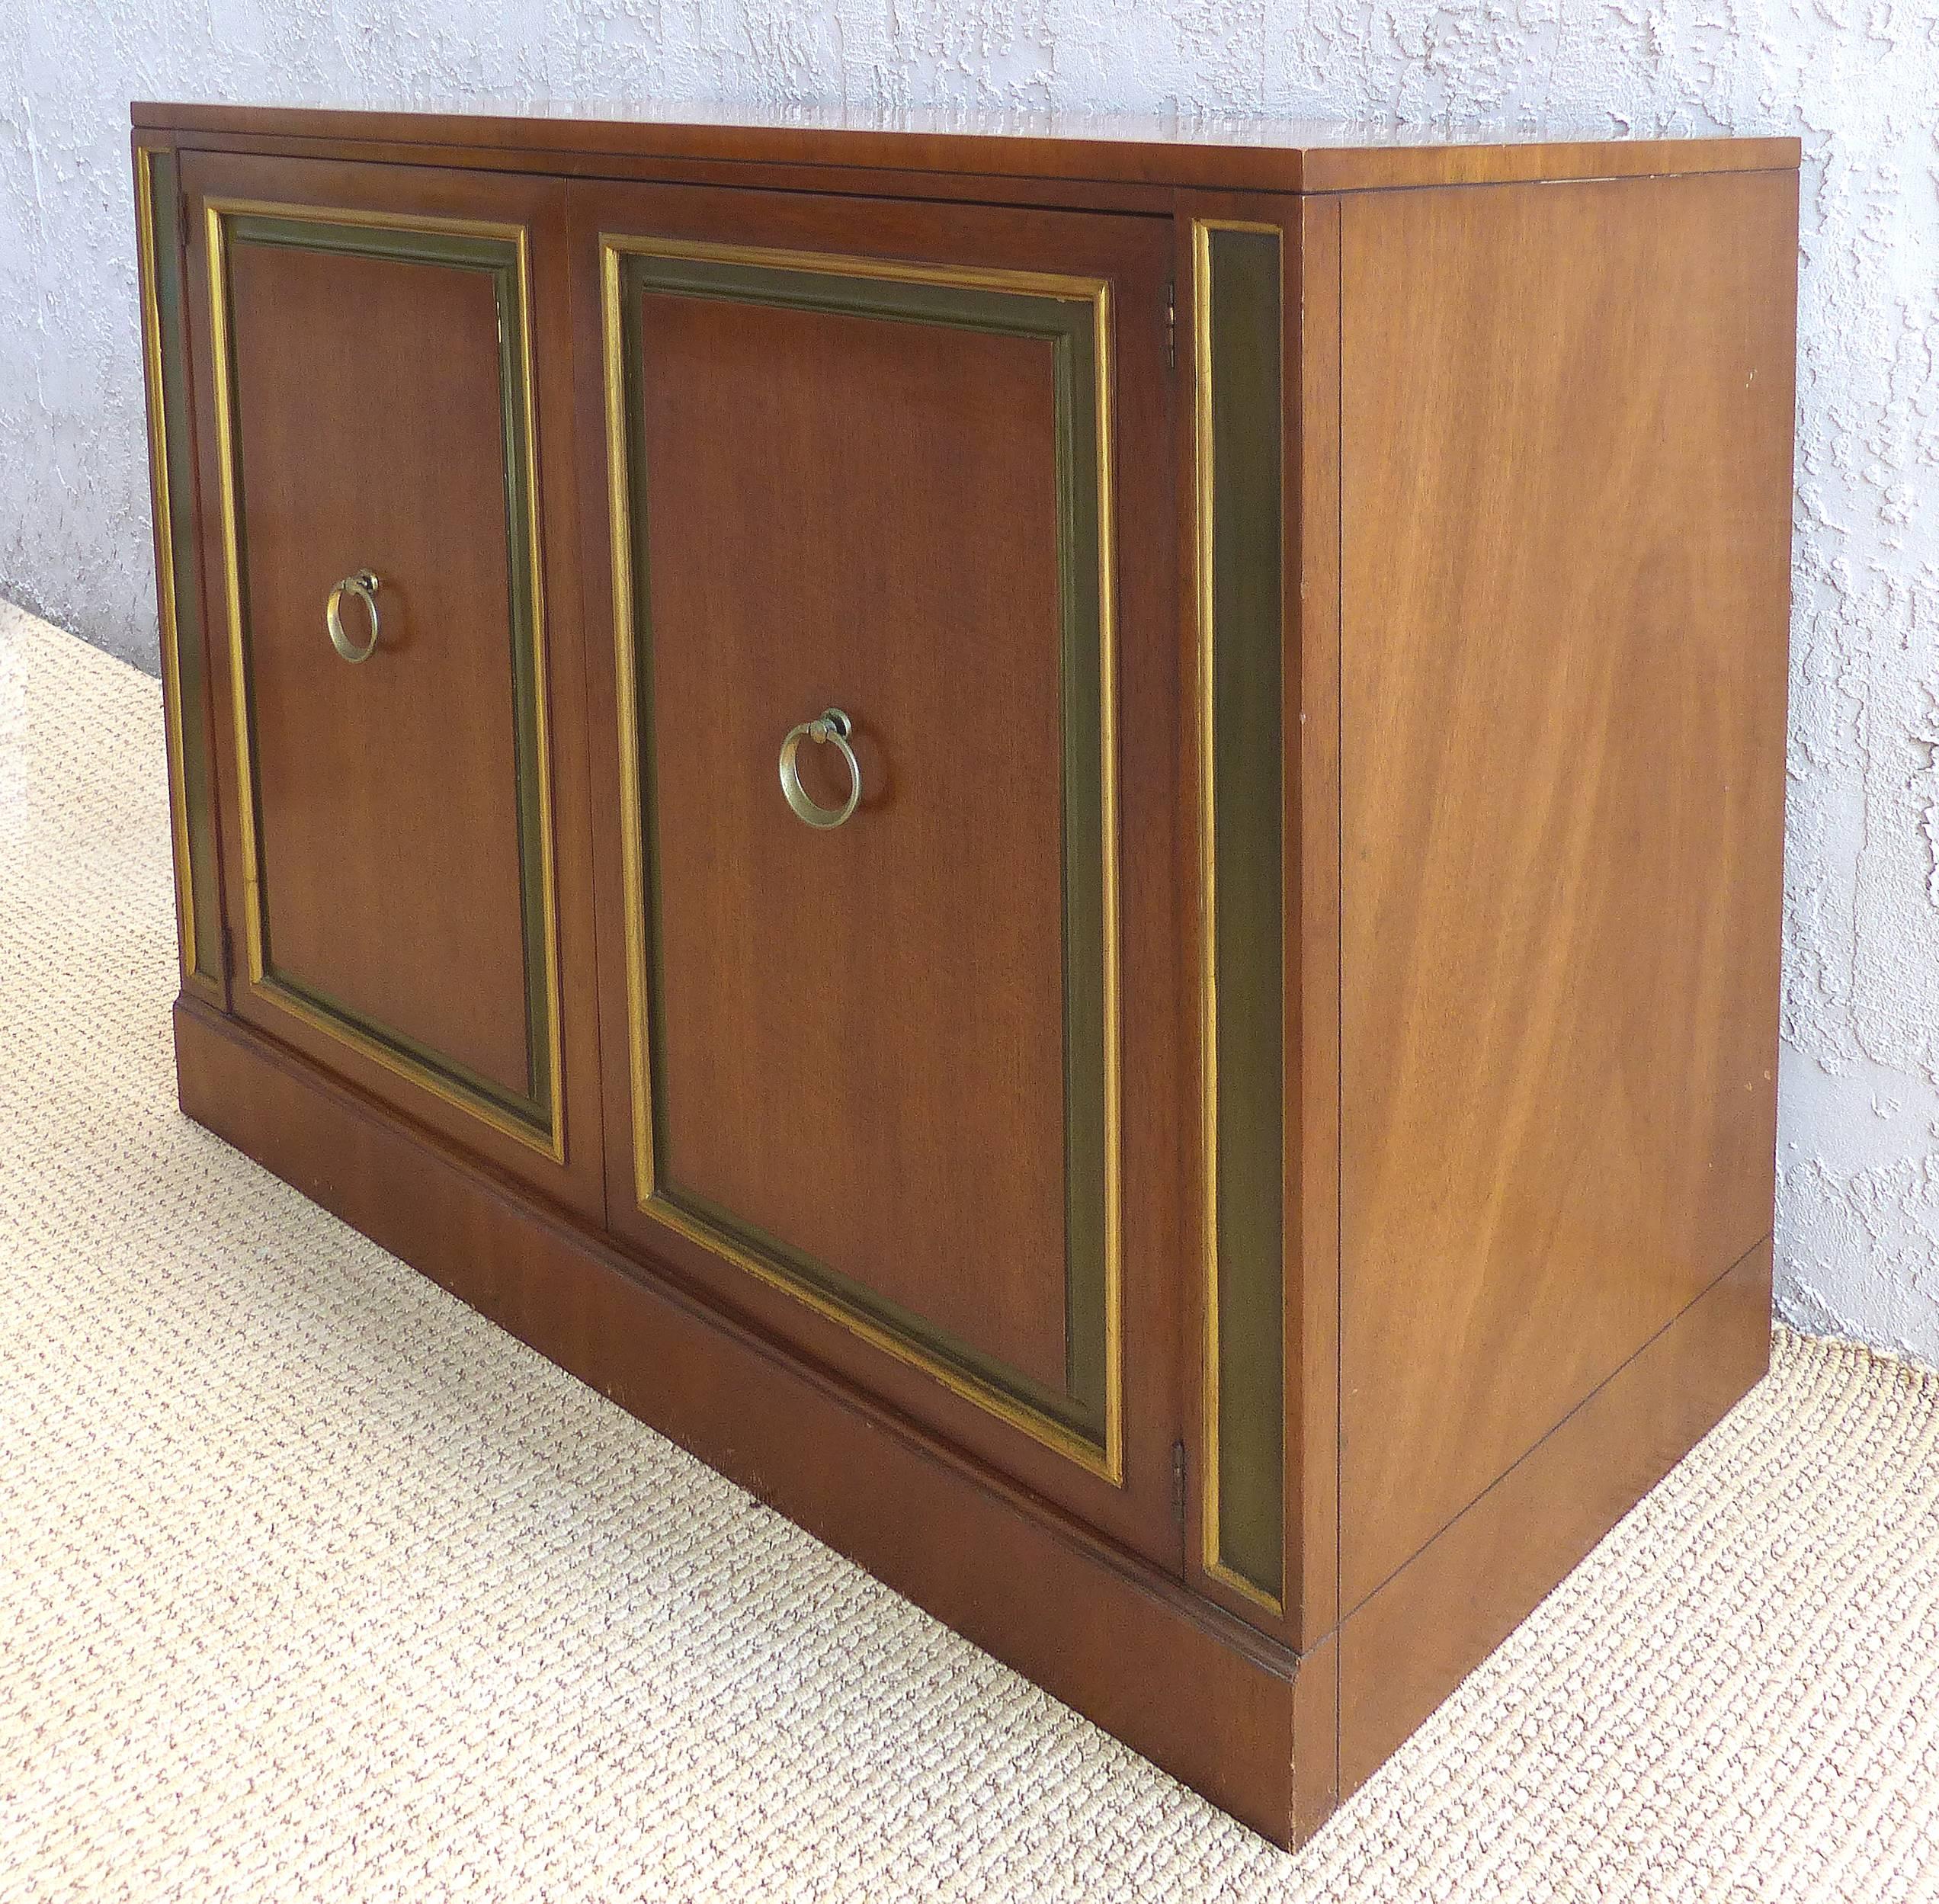 Offered for sale is an elegant pair of 1950s Hollywood Regency cabinets by Dorothy Draper for Heritage Furniture. The pair can be installed as bedside tables or used as servers. The pair retains the original finishes including the gold and olive